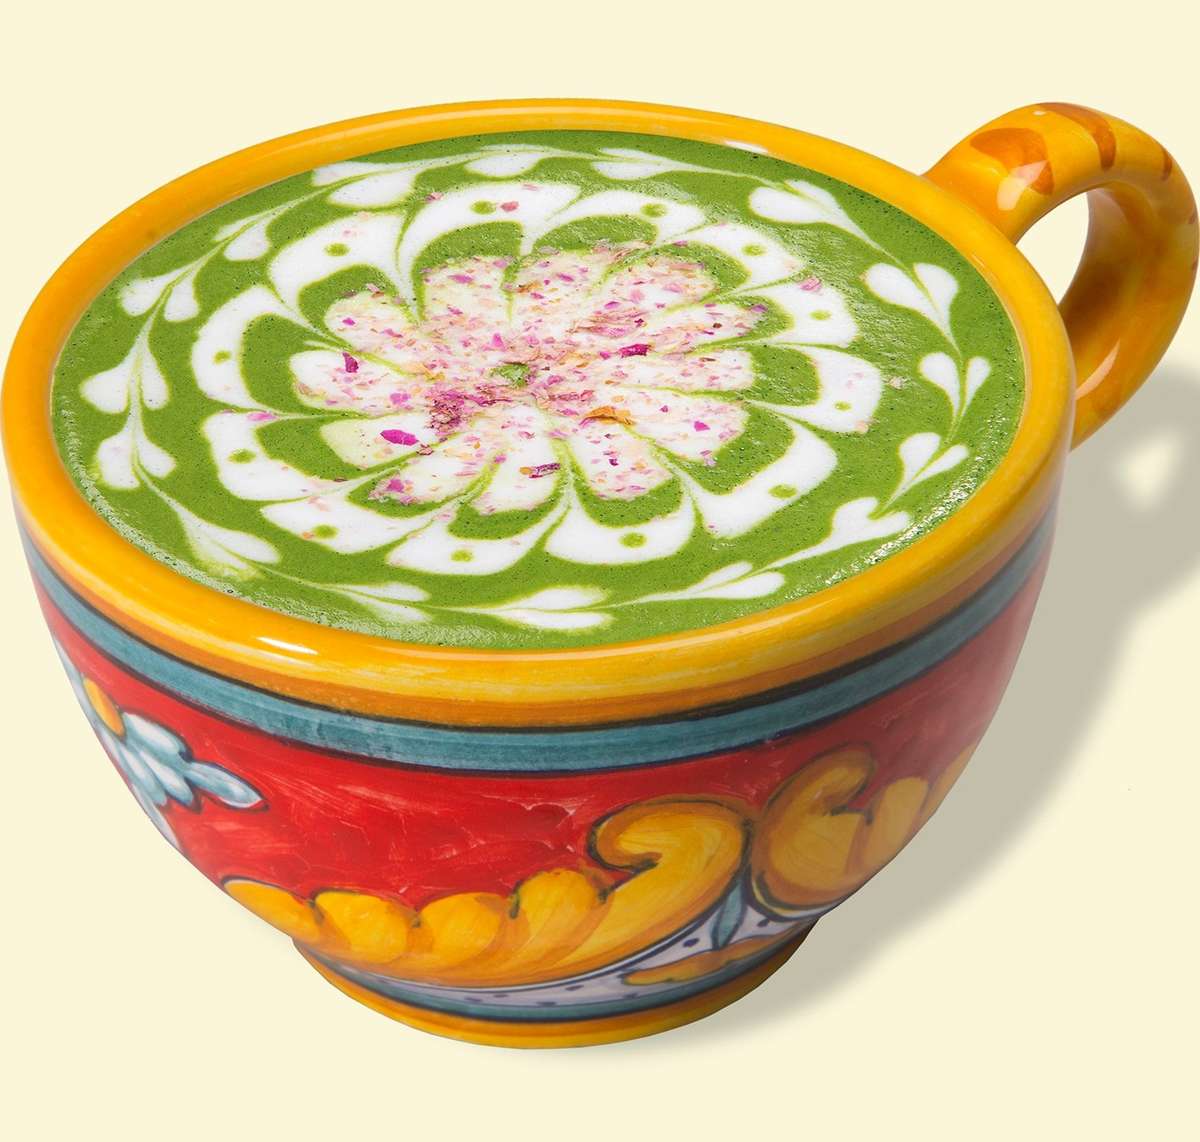 Green Rose Latte with green tea with white and pink design edged on top, in a floral mug